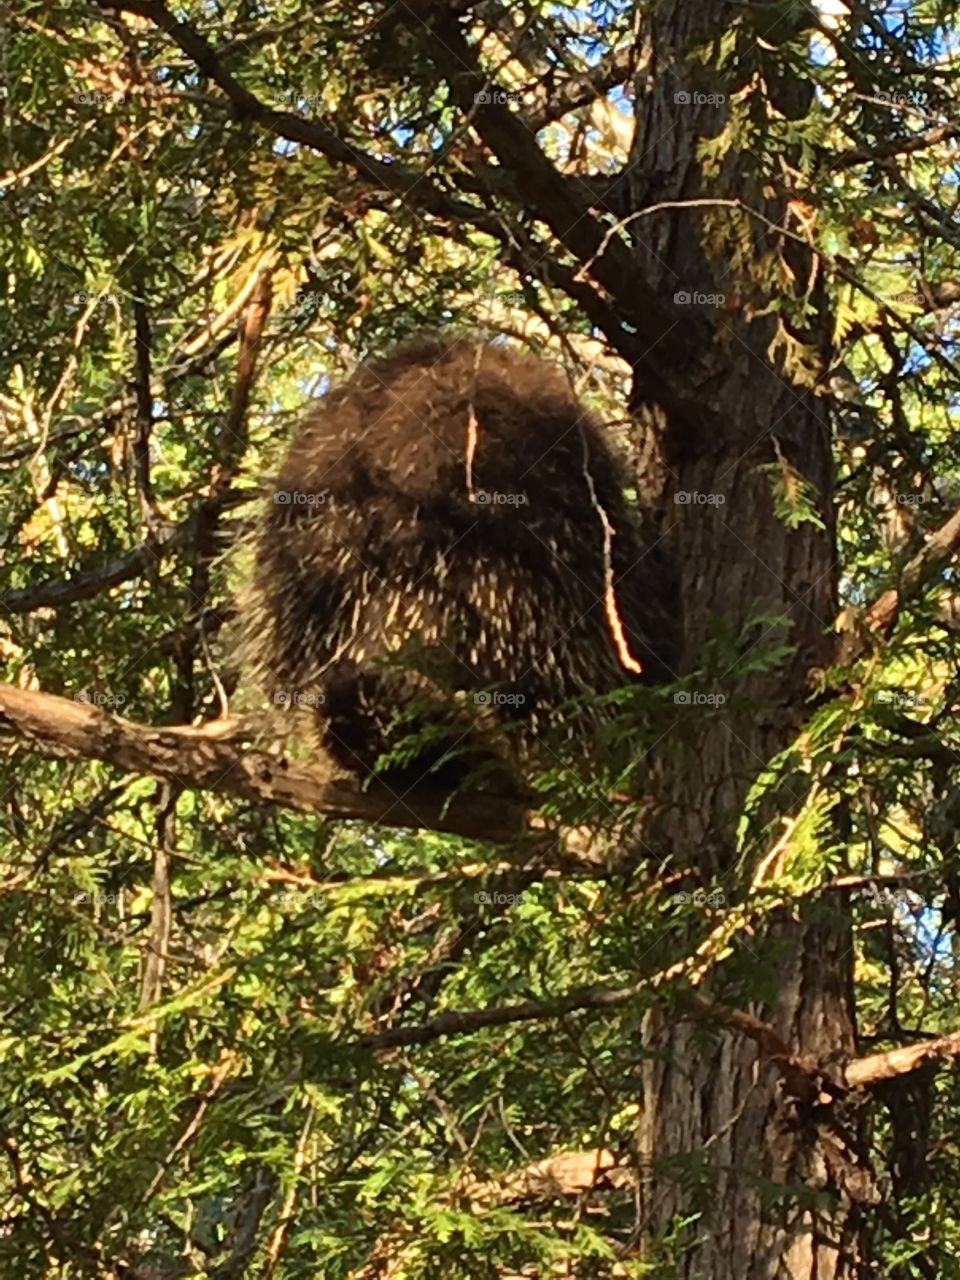 Porcupine up in the tree